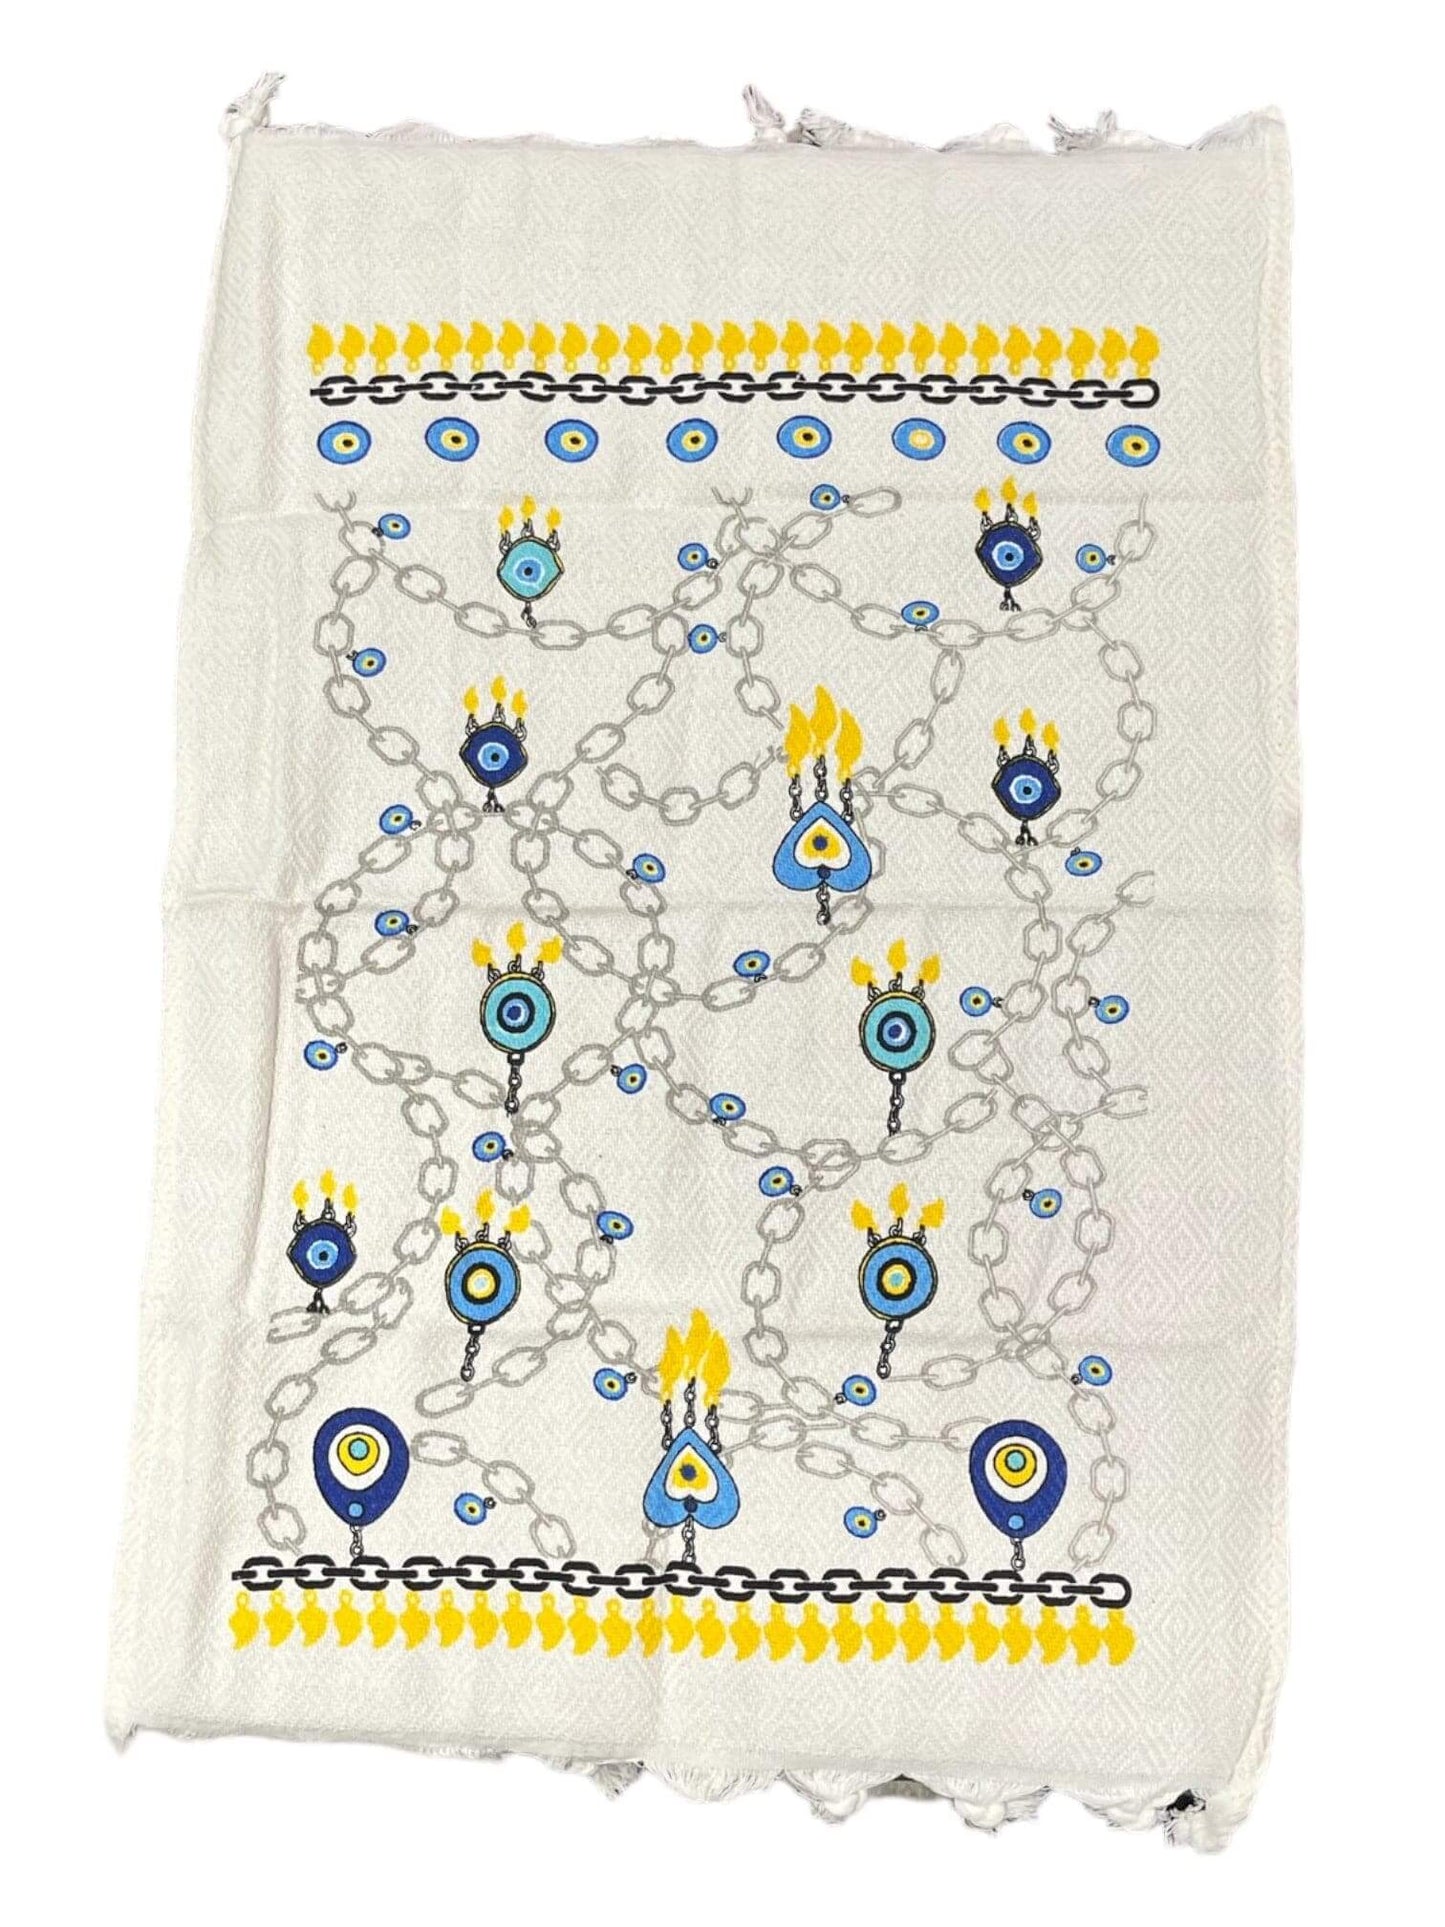 Tea Towels (Cotton Kitchen Towels) Evil Eye Chain100% Cotton Tea Towel, made in Turkey, These towels offer premium quality with their pure cotton composition, ensuring high absorbency for drying dishes and versatile use in various kitchen tasks. Their dur